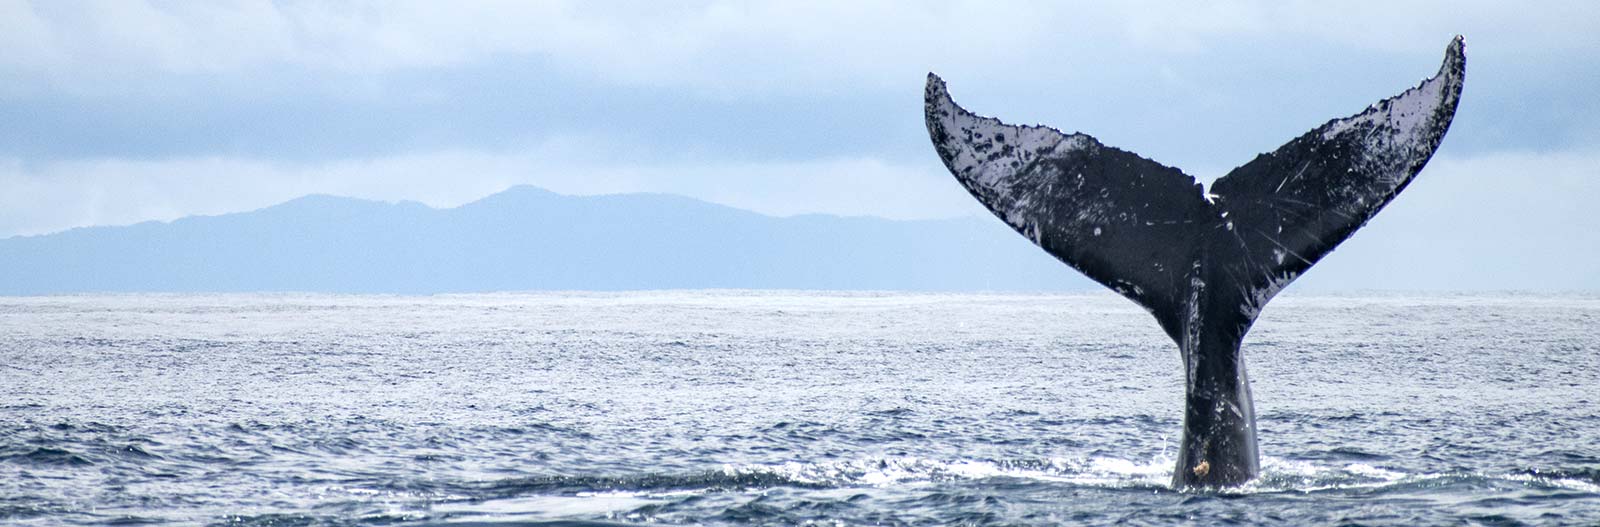 Humpback Whale Tail in the Santa Barbara Channel